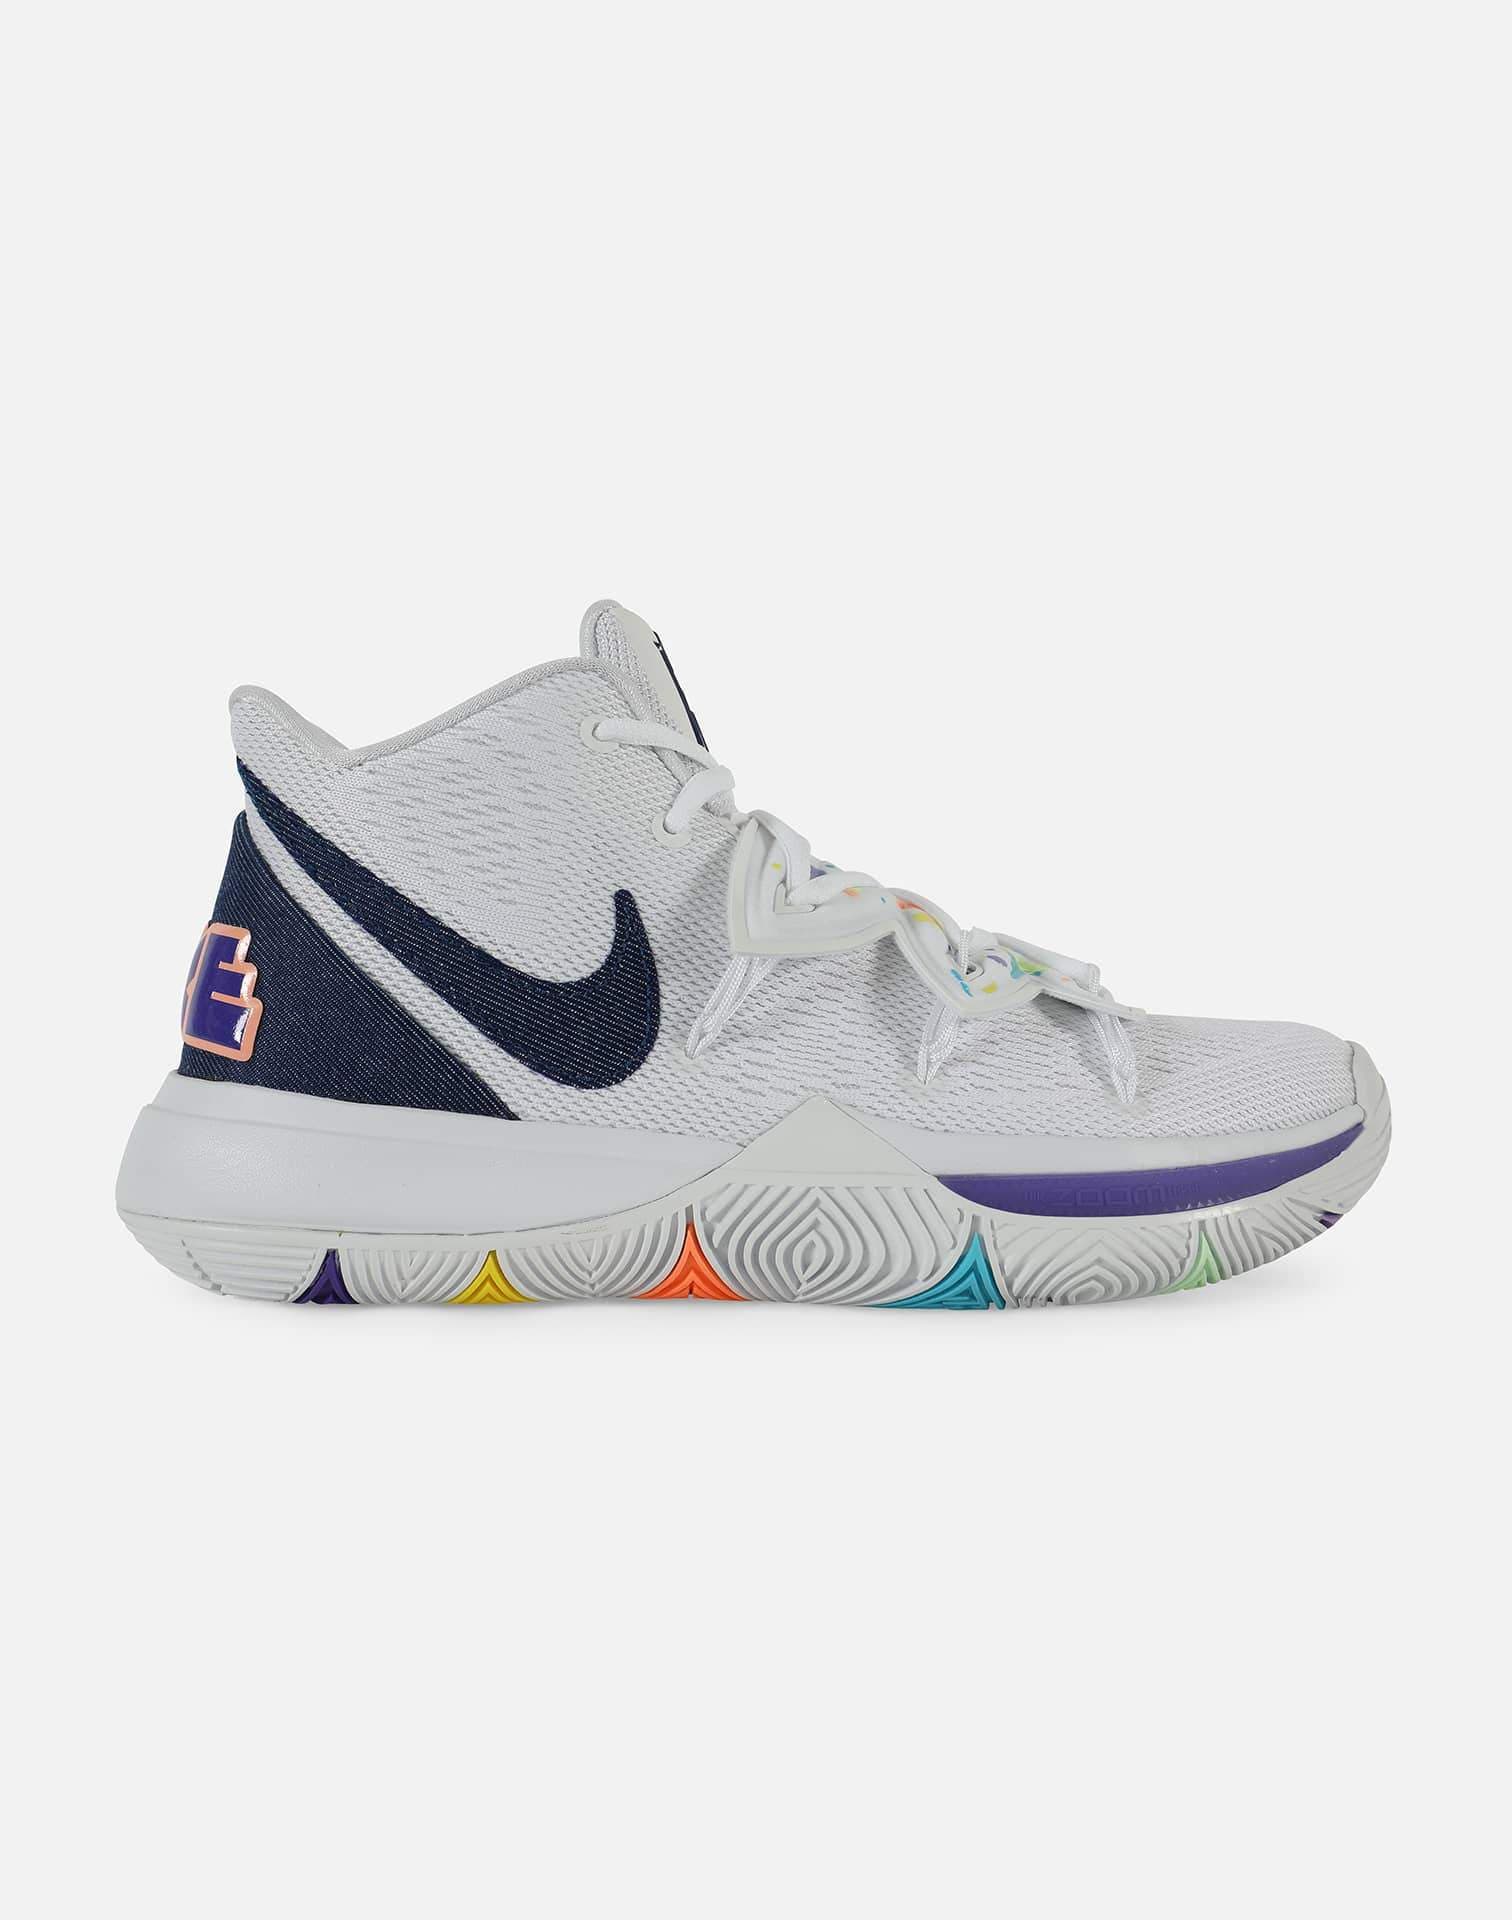 Nike Kyrie 5 Have A Nike Day Release Info SneakerNews